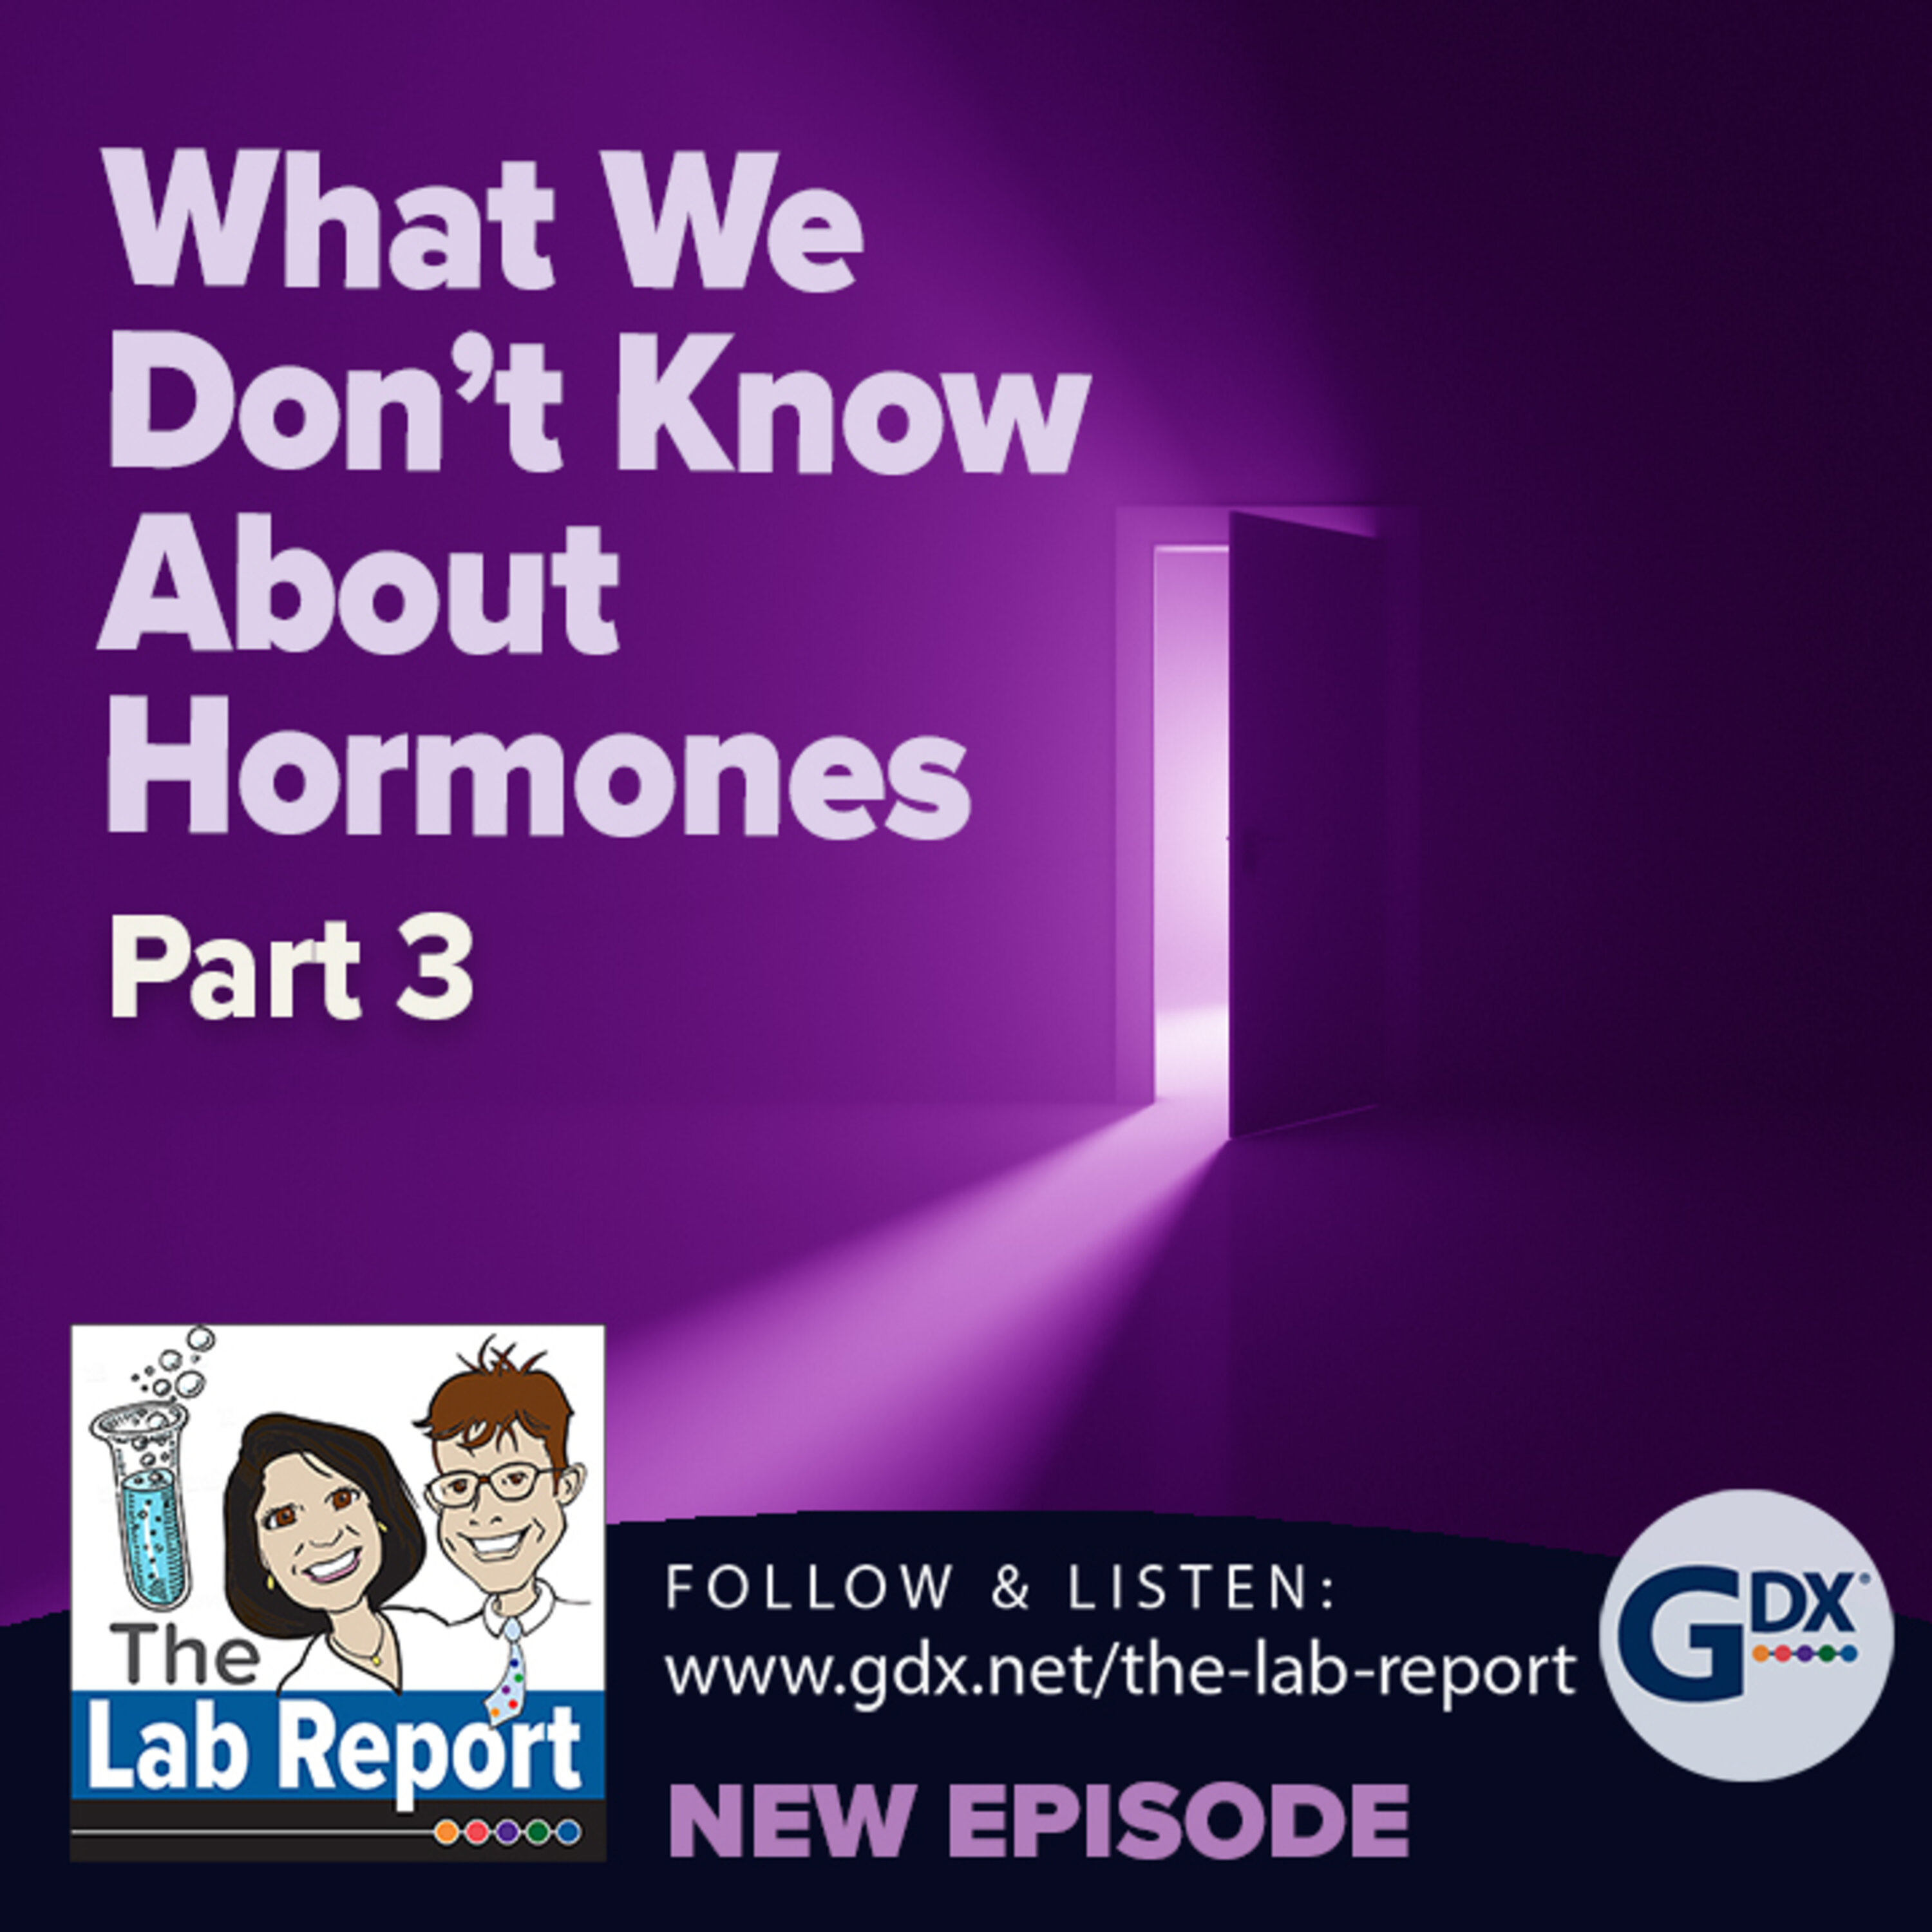 What We Don't Know About Hormones - Part 3